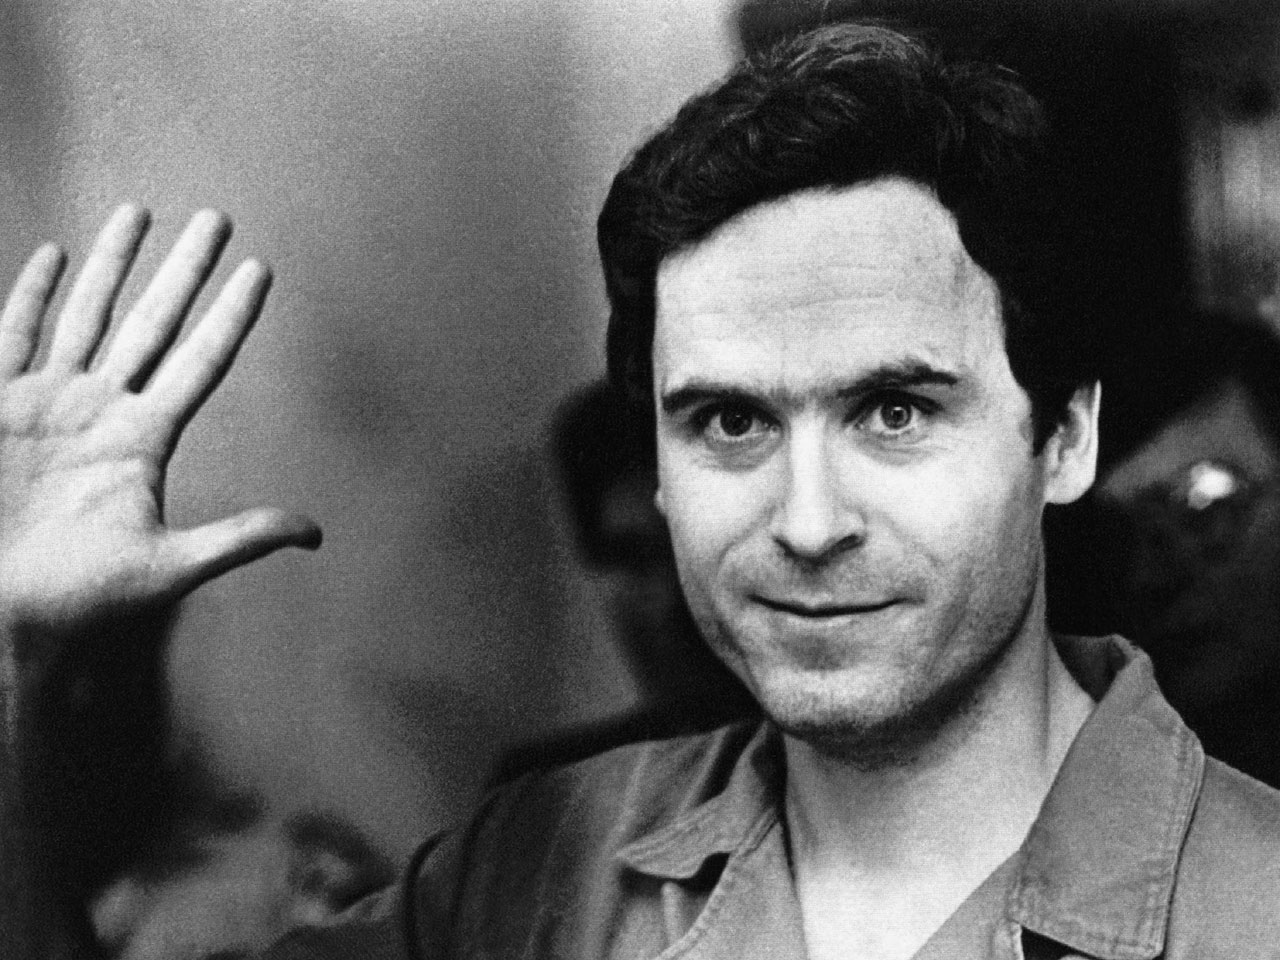 "Countless millions who have walked this earth before us have gone through this, so this is just an experience we all share." <i>â€“Ted Bundy (1946-1989, serial killer of 30-36+ victims)</i>